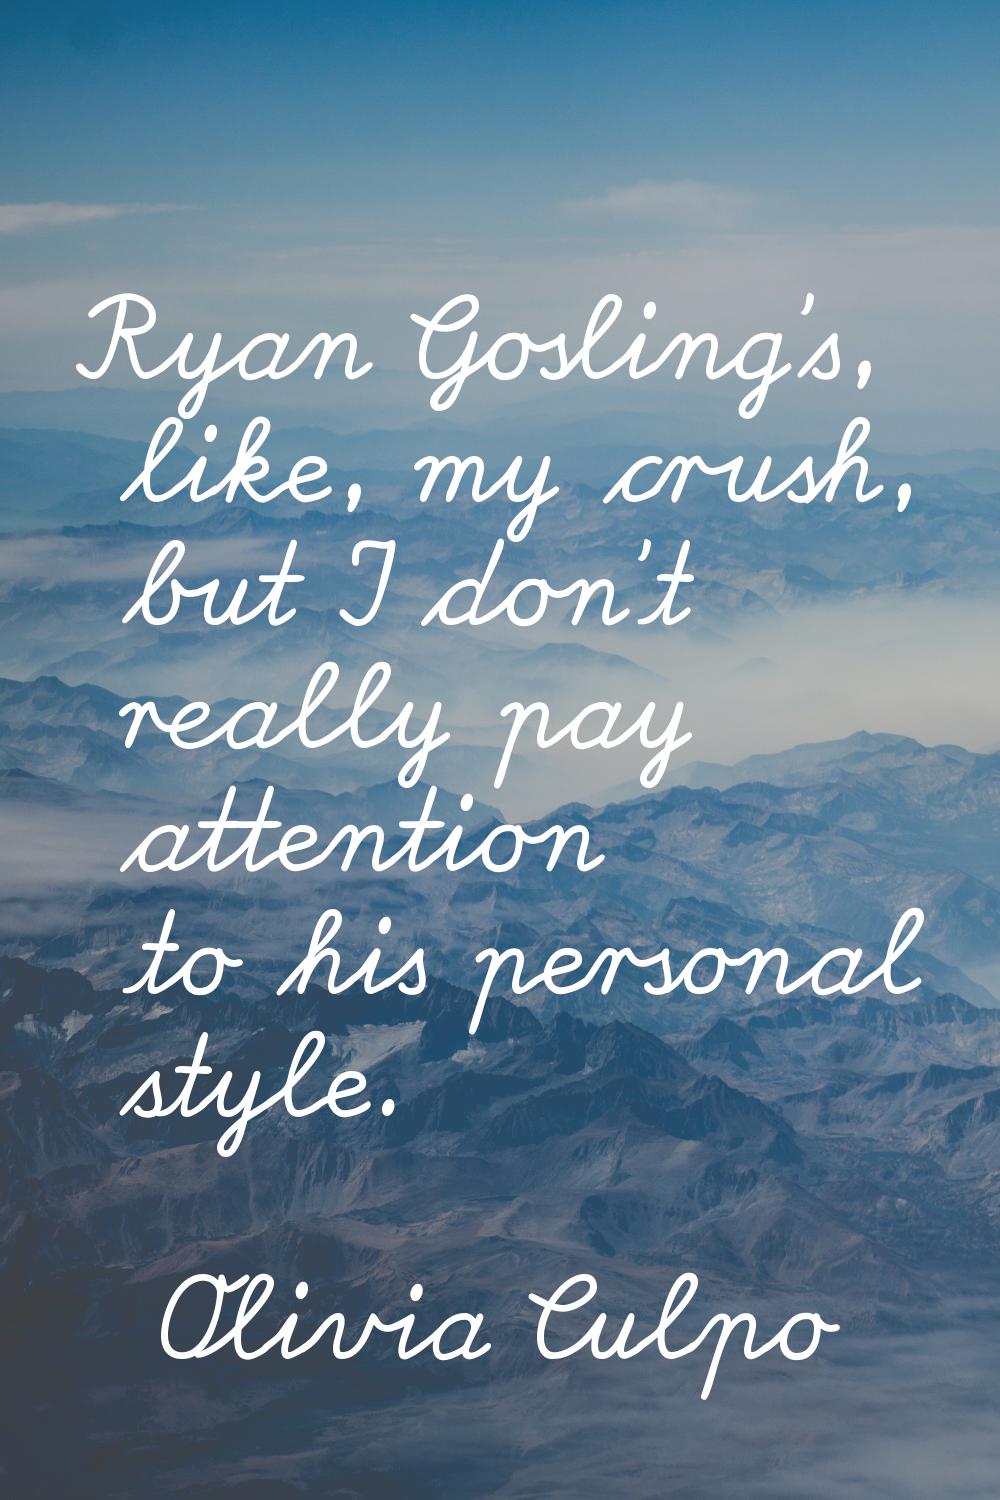 Ryan Gosling's, like, my crush, but I don't really pay attention to his personal style.